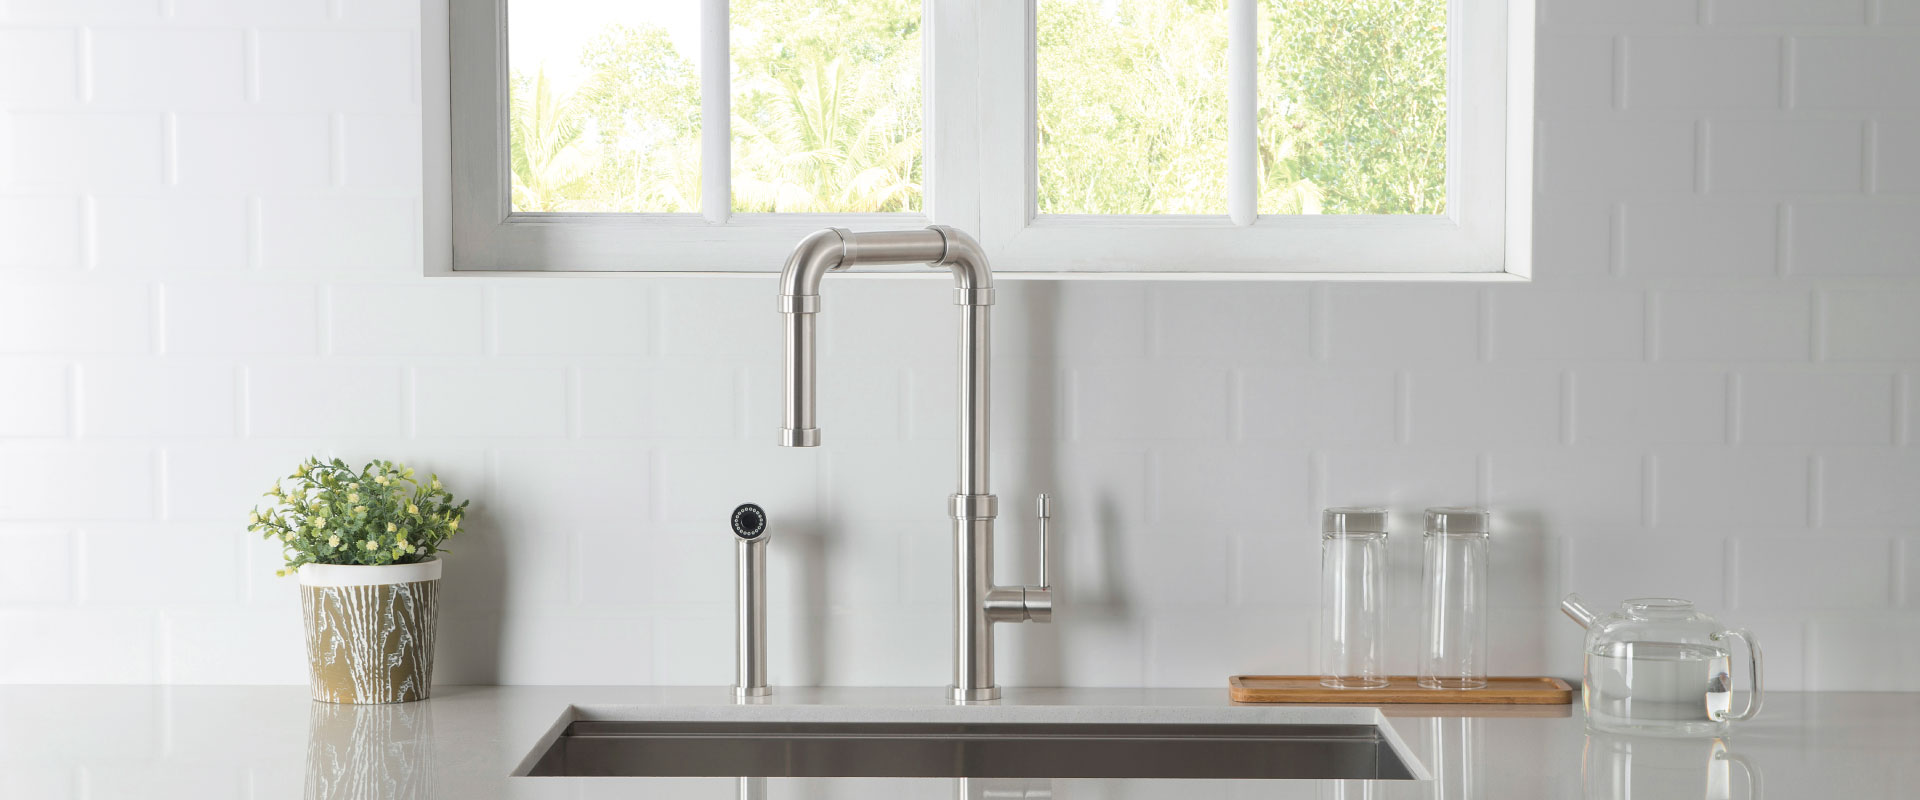 Stainless Steel Kitchen Faucet With Side Spray